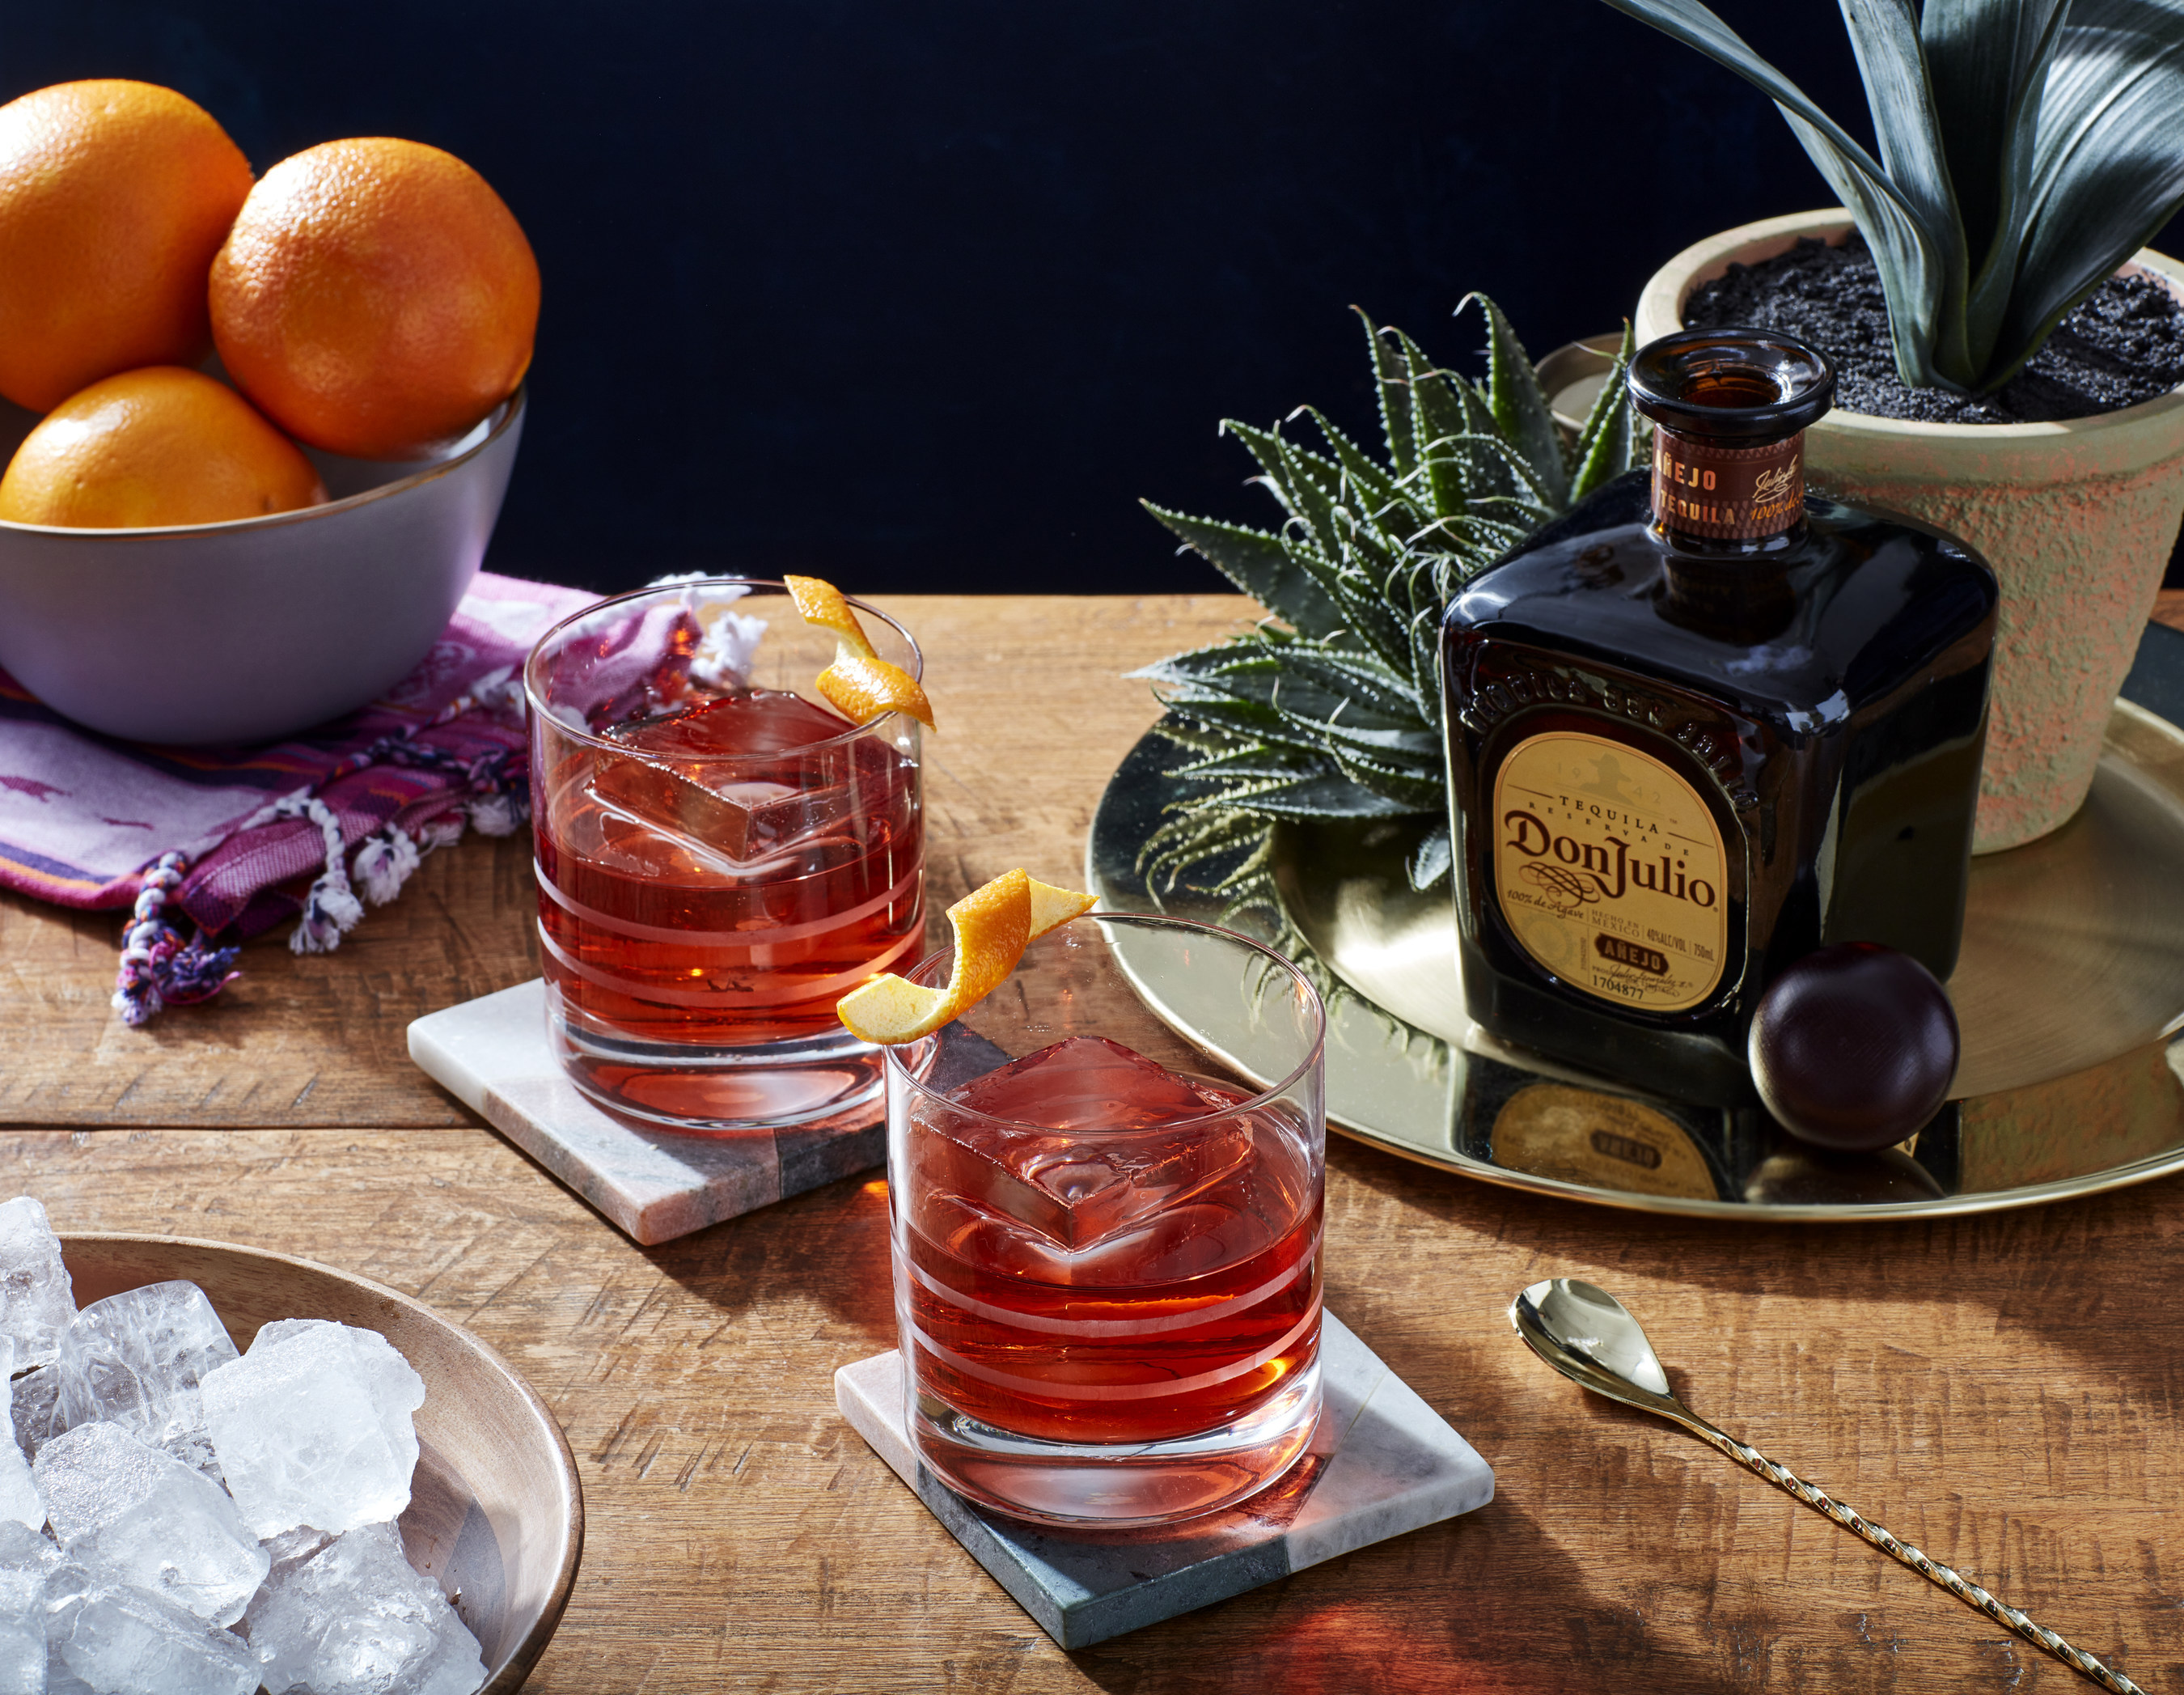 Nominees' Negroni is one of the OSCARS-themed cocktails that will be served at the Governors Ball. (Photo: Tequila Don Julio) 